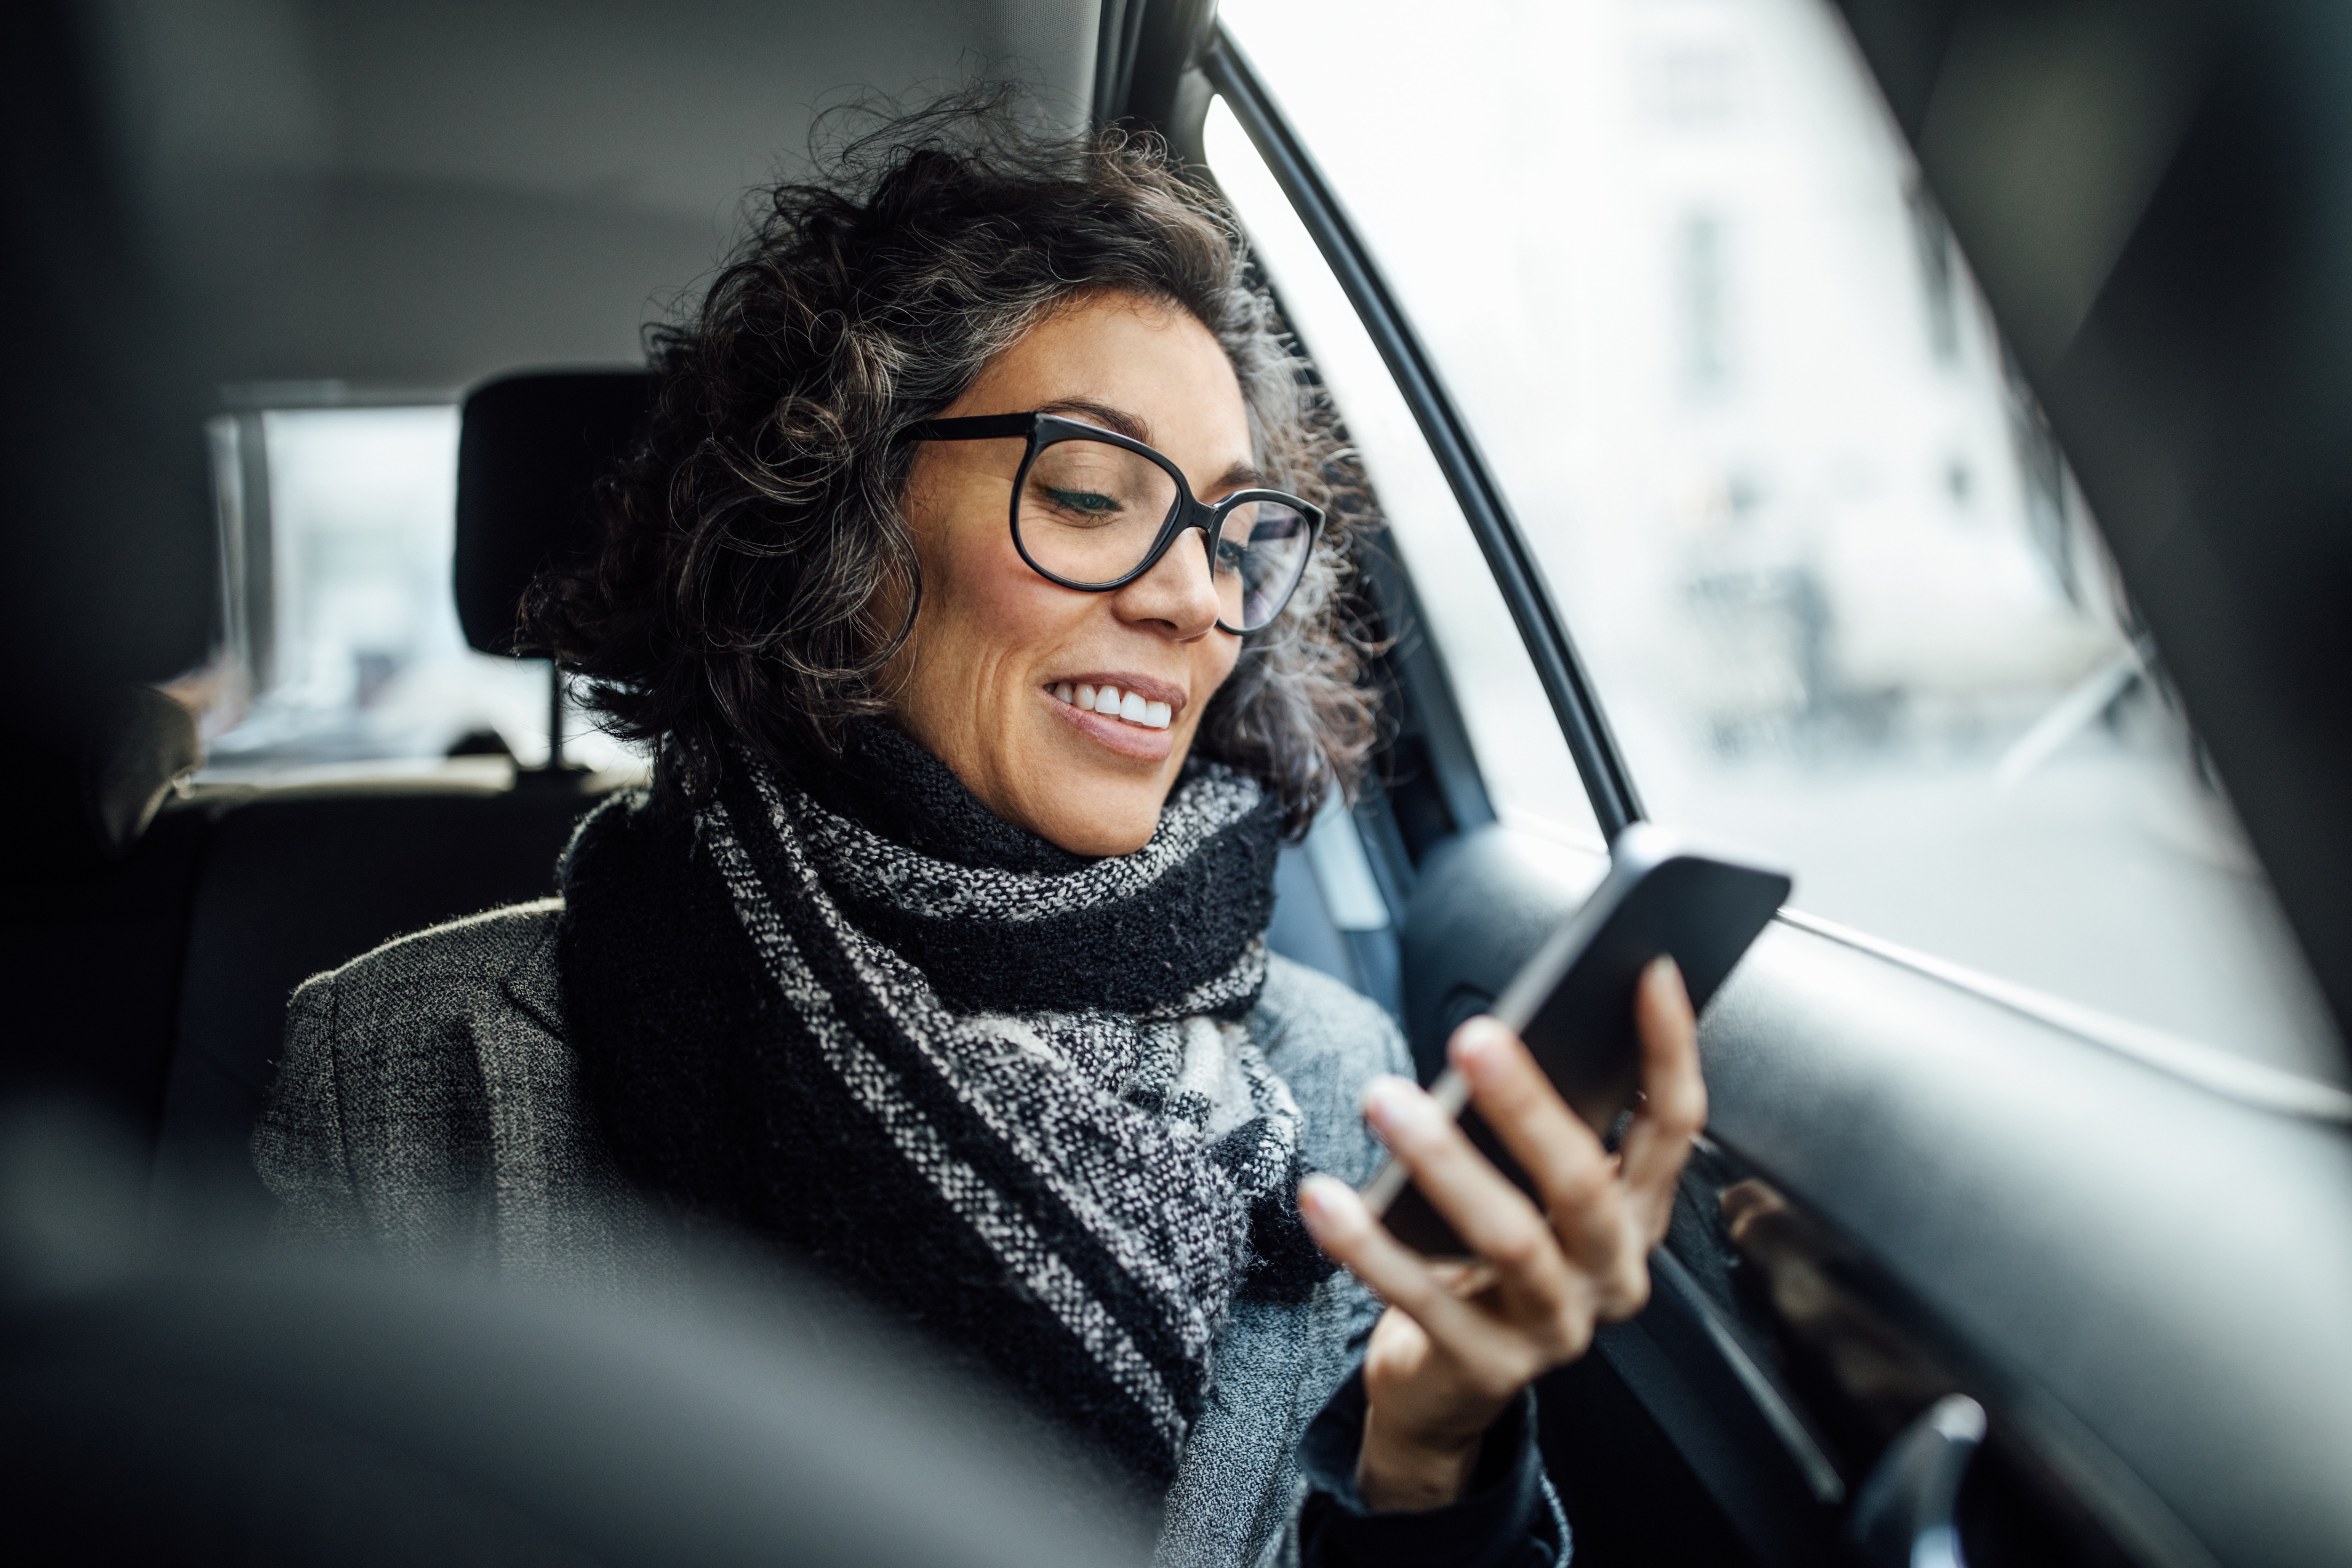 Woman looking at her phone and smiling while taking an Uber to the airport